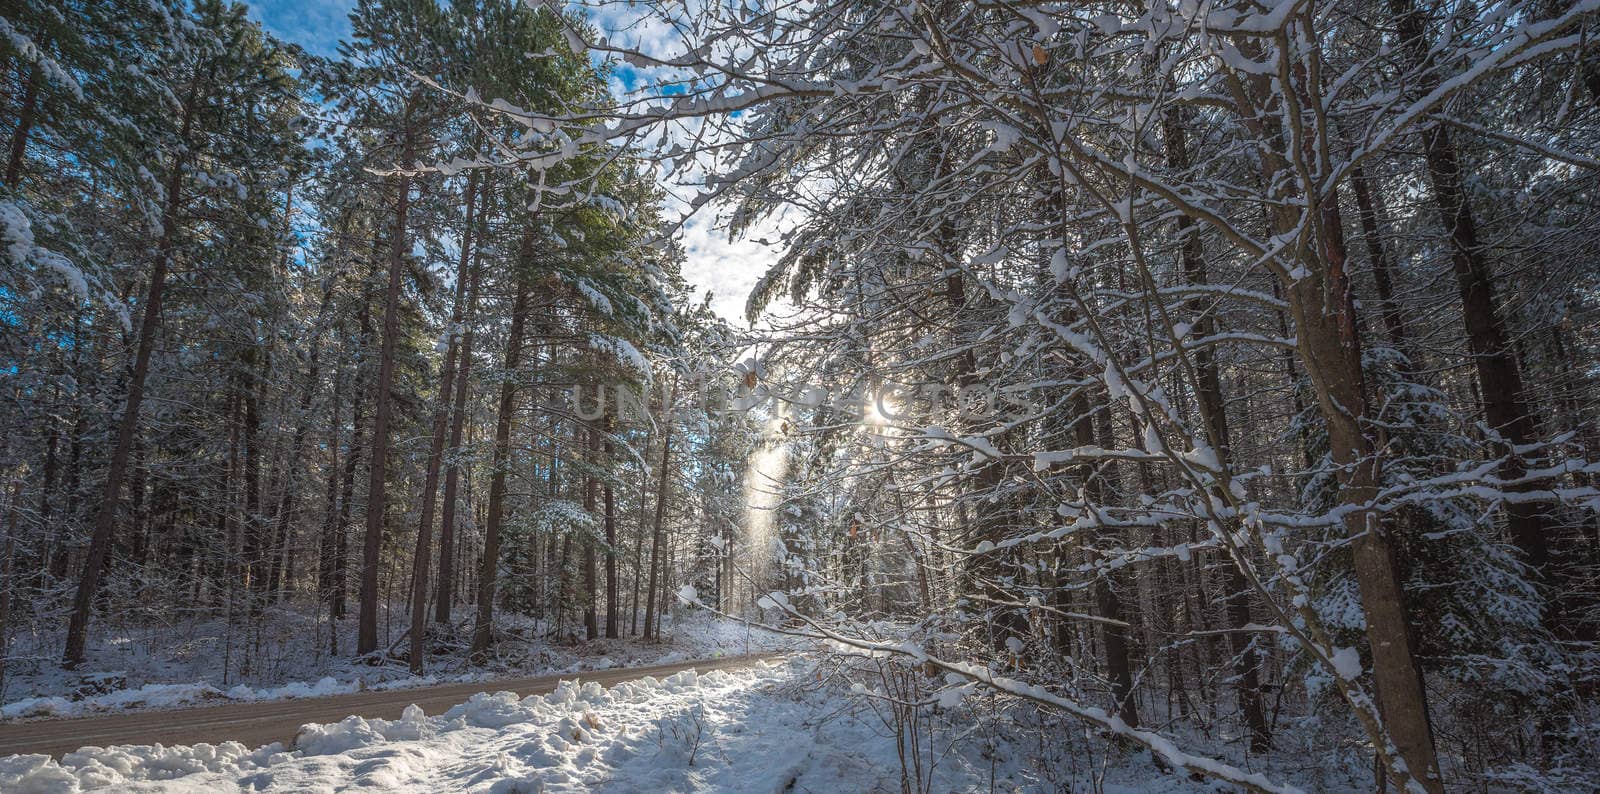 The sun provides a backlit view of snow falling from a branch of a pine tree.  Frosty winter morning, forests draped in frozen snow.